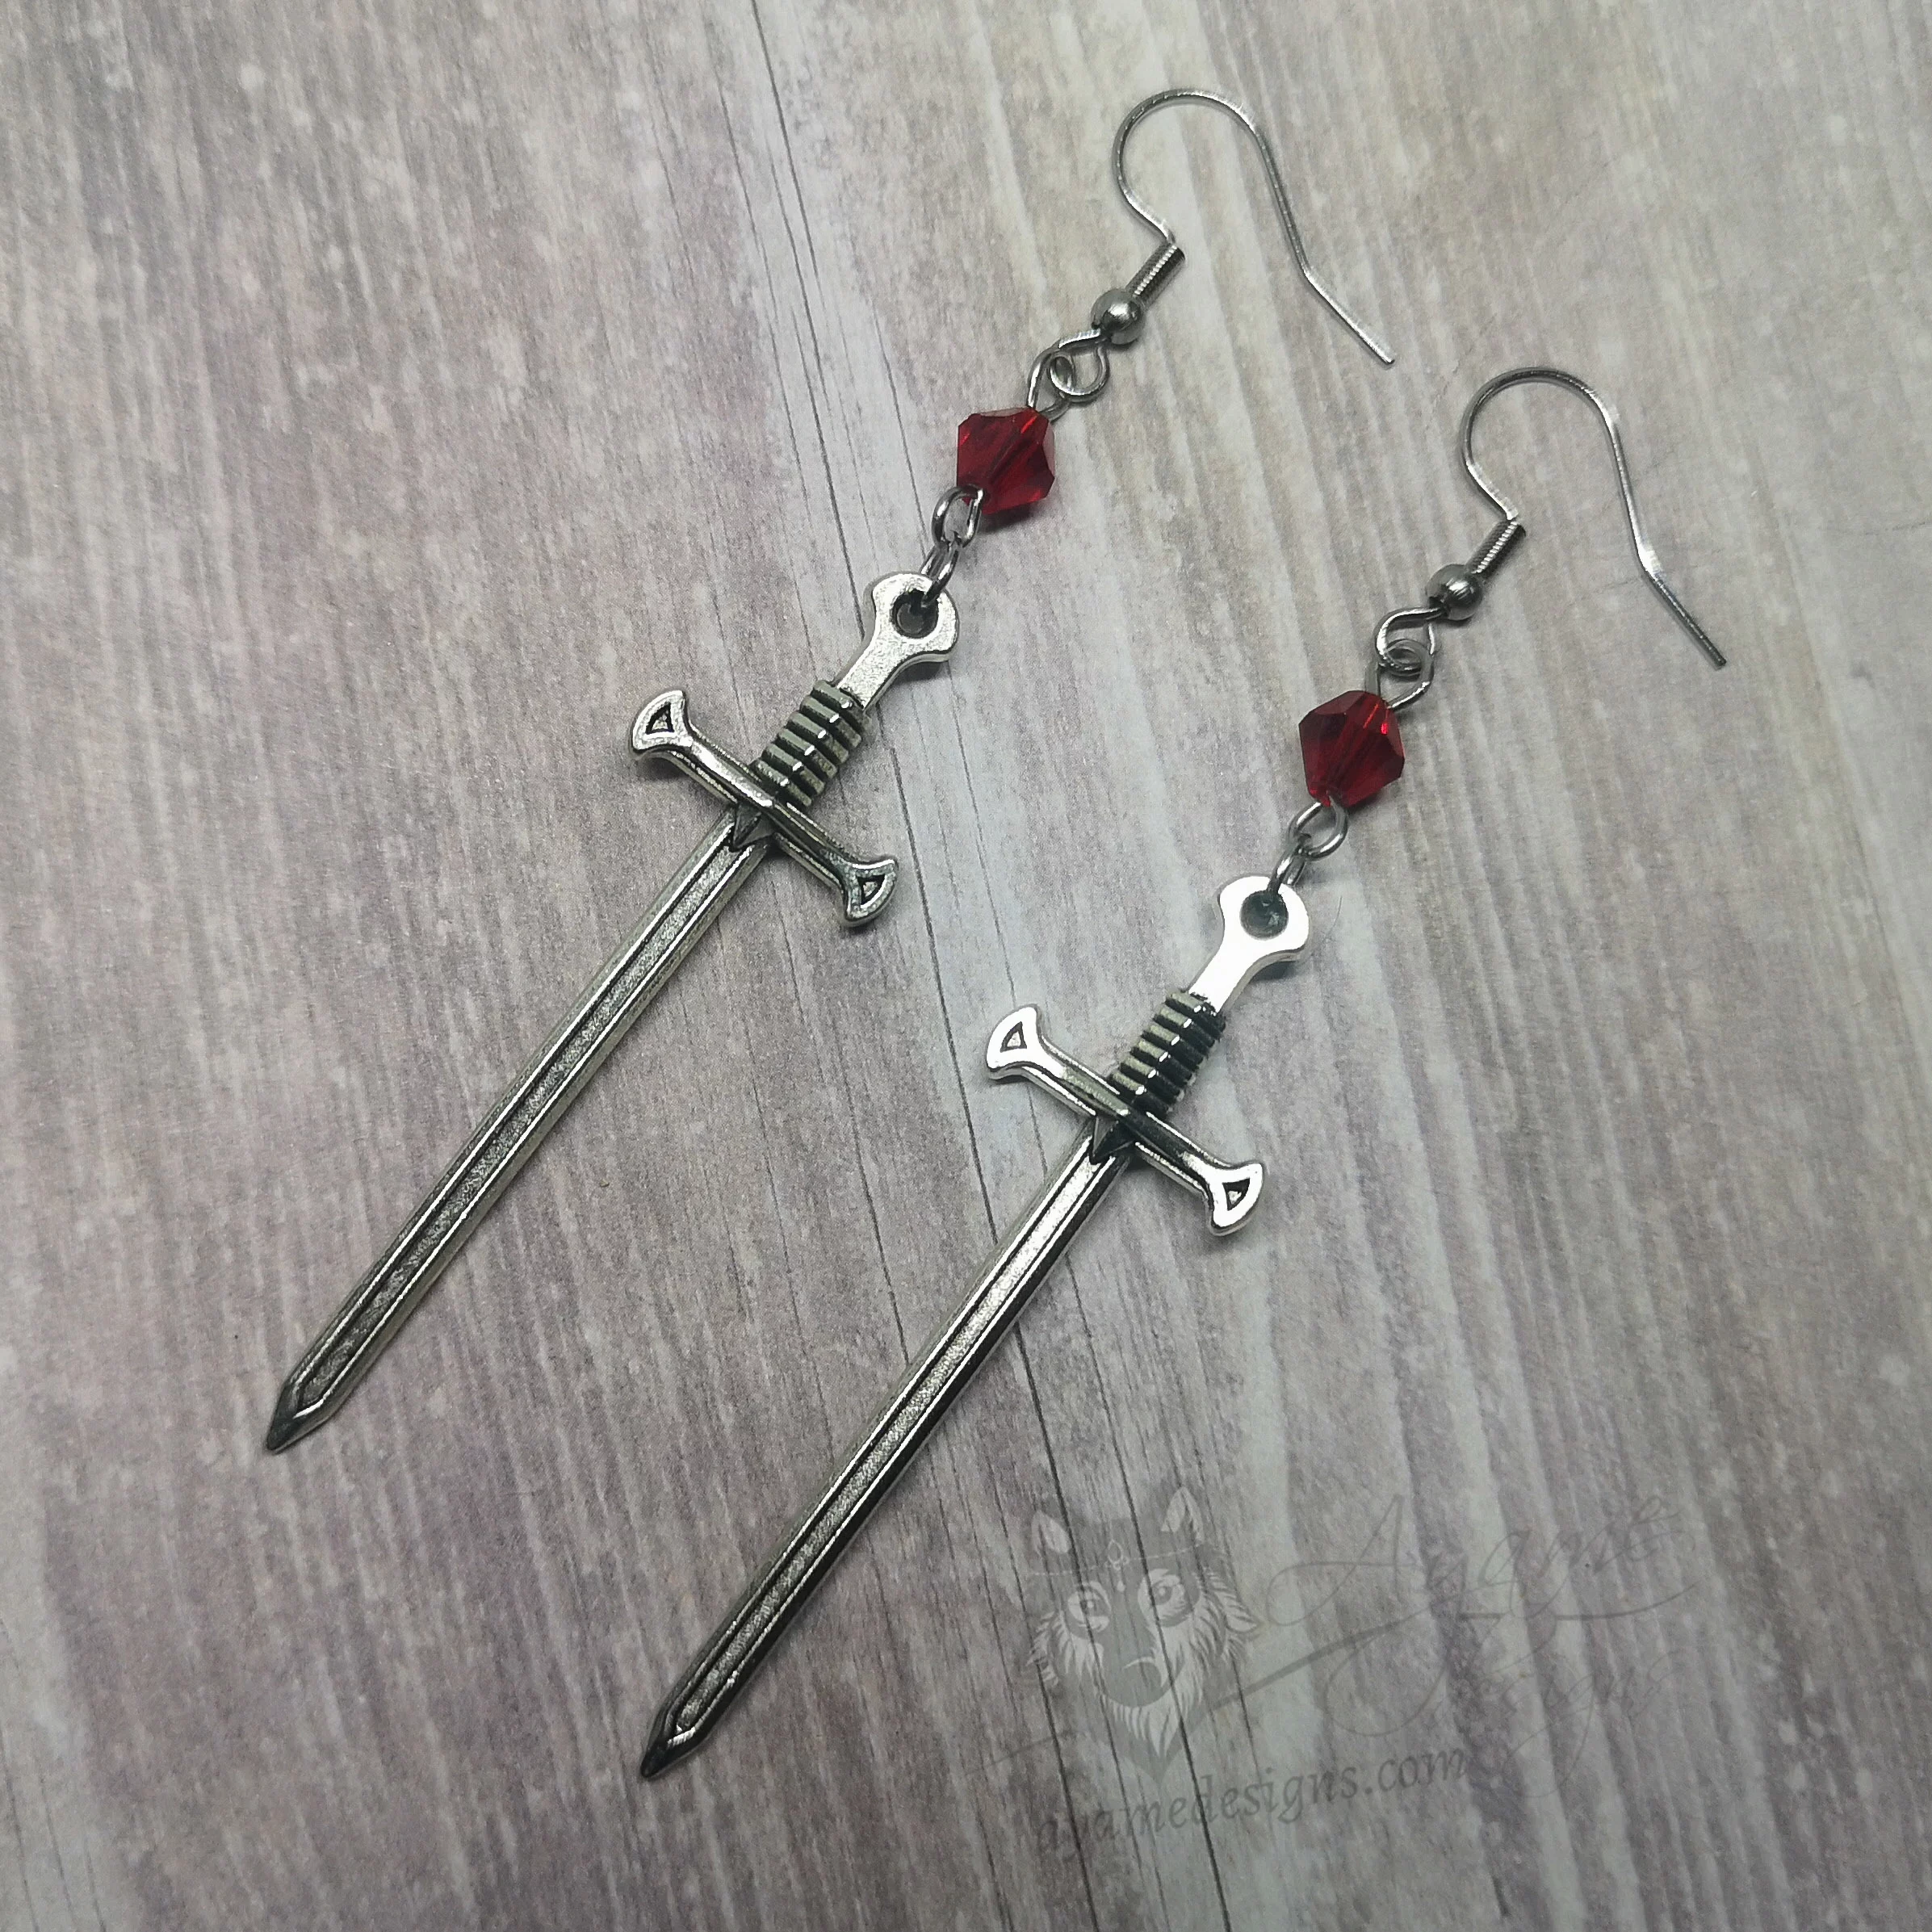 Handmade fantasy earrings with silver sword pendants, red Austrian crystal beads and stainless steel earring hooks